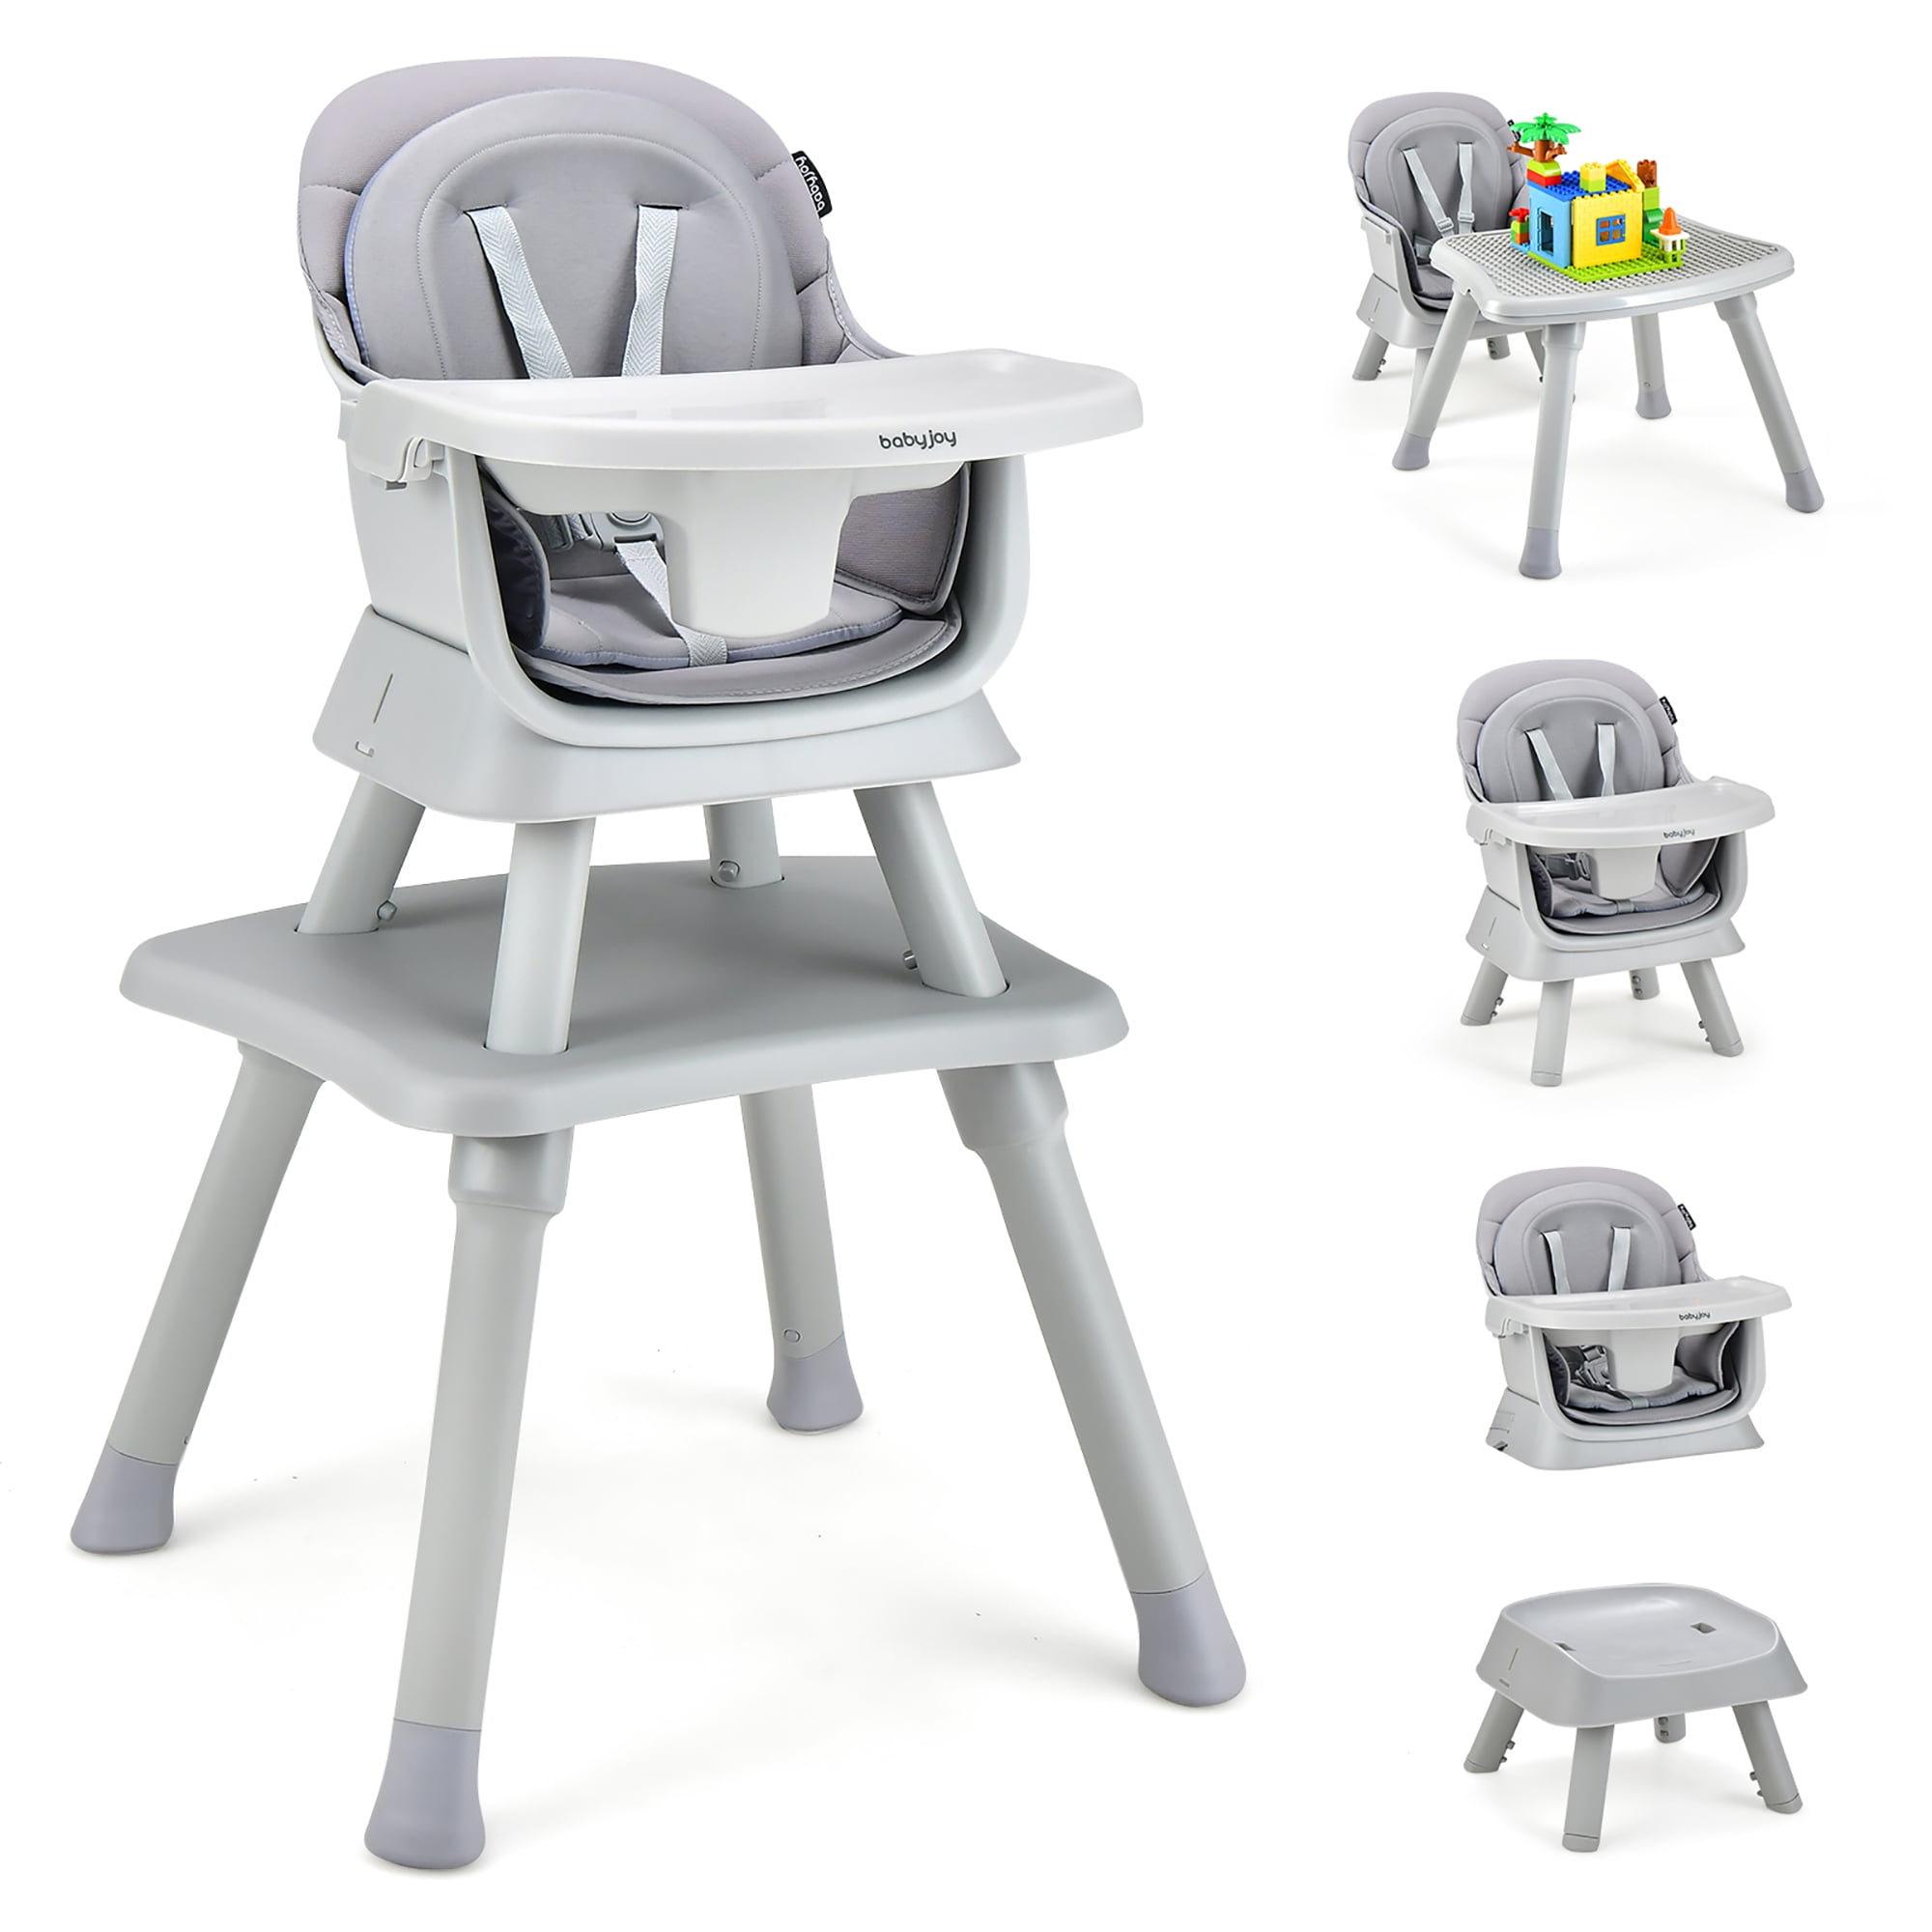 Up & Down Highchair white/grey